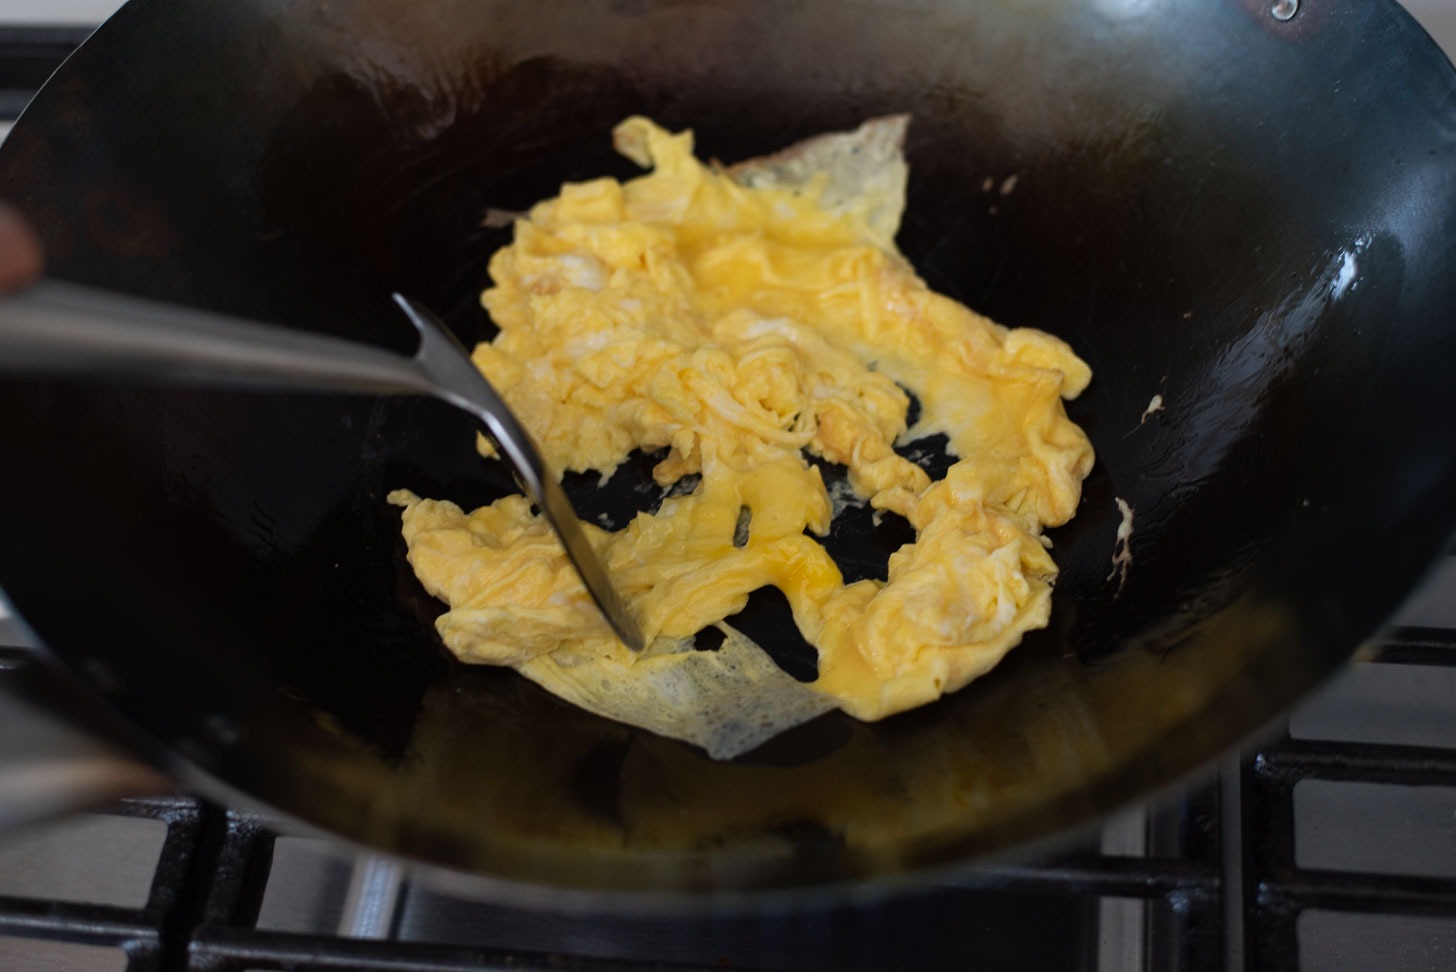 Egg is scrambled in a wok to make Spam fried rice.